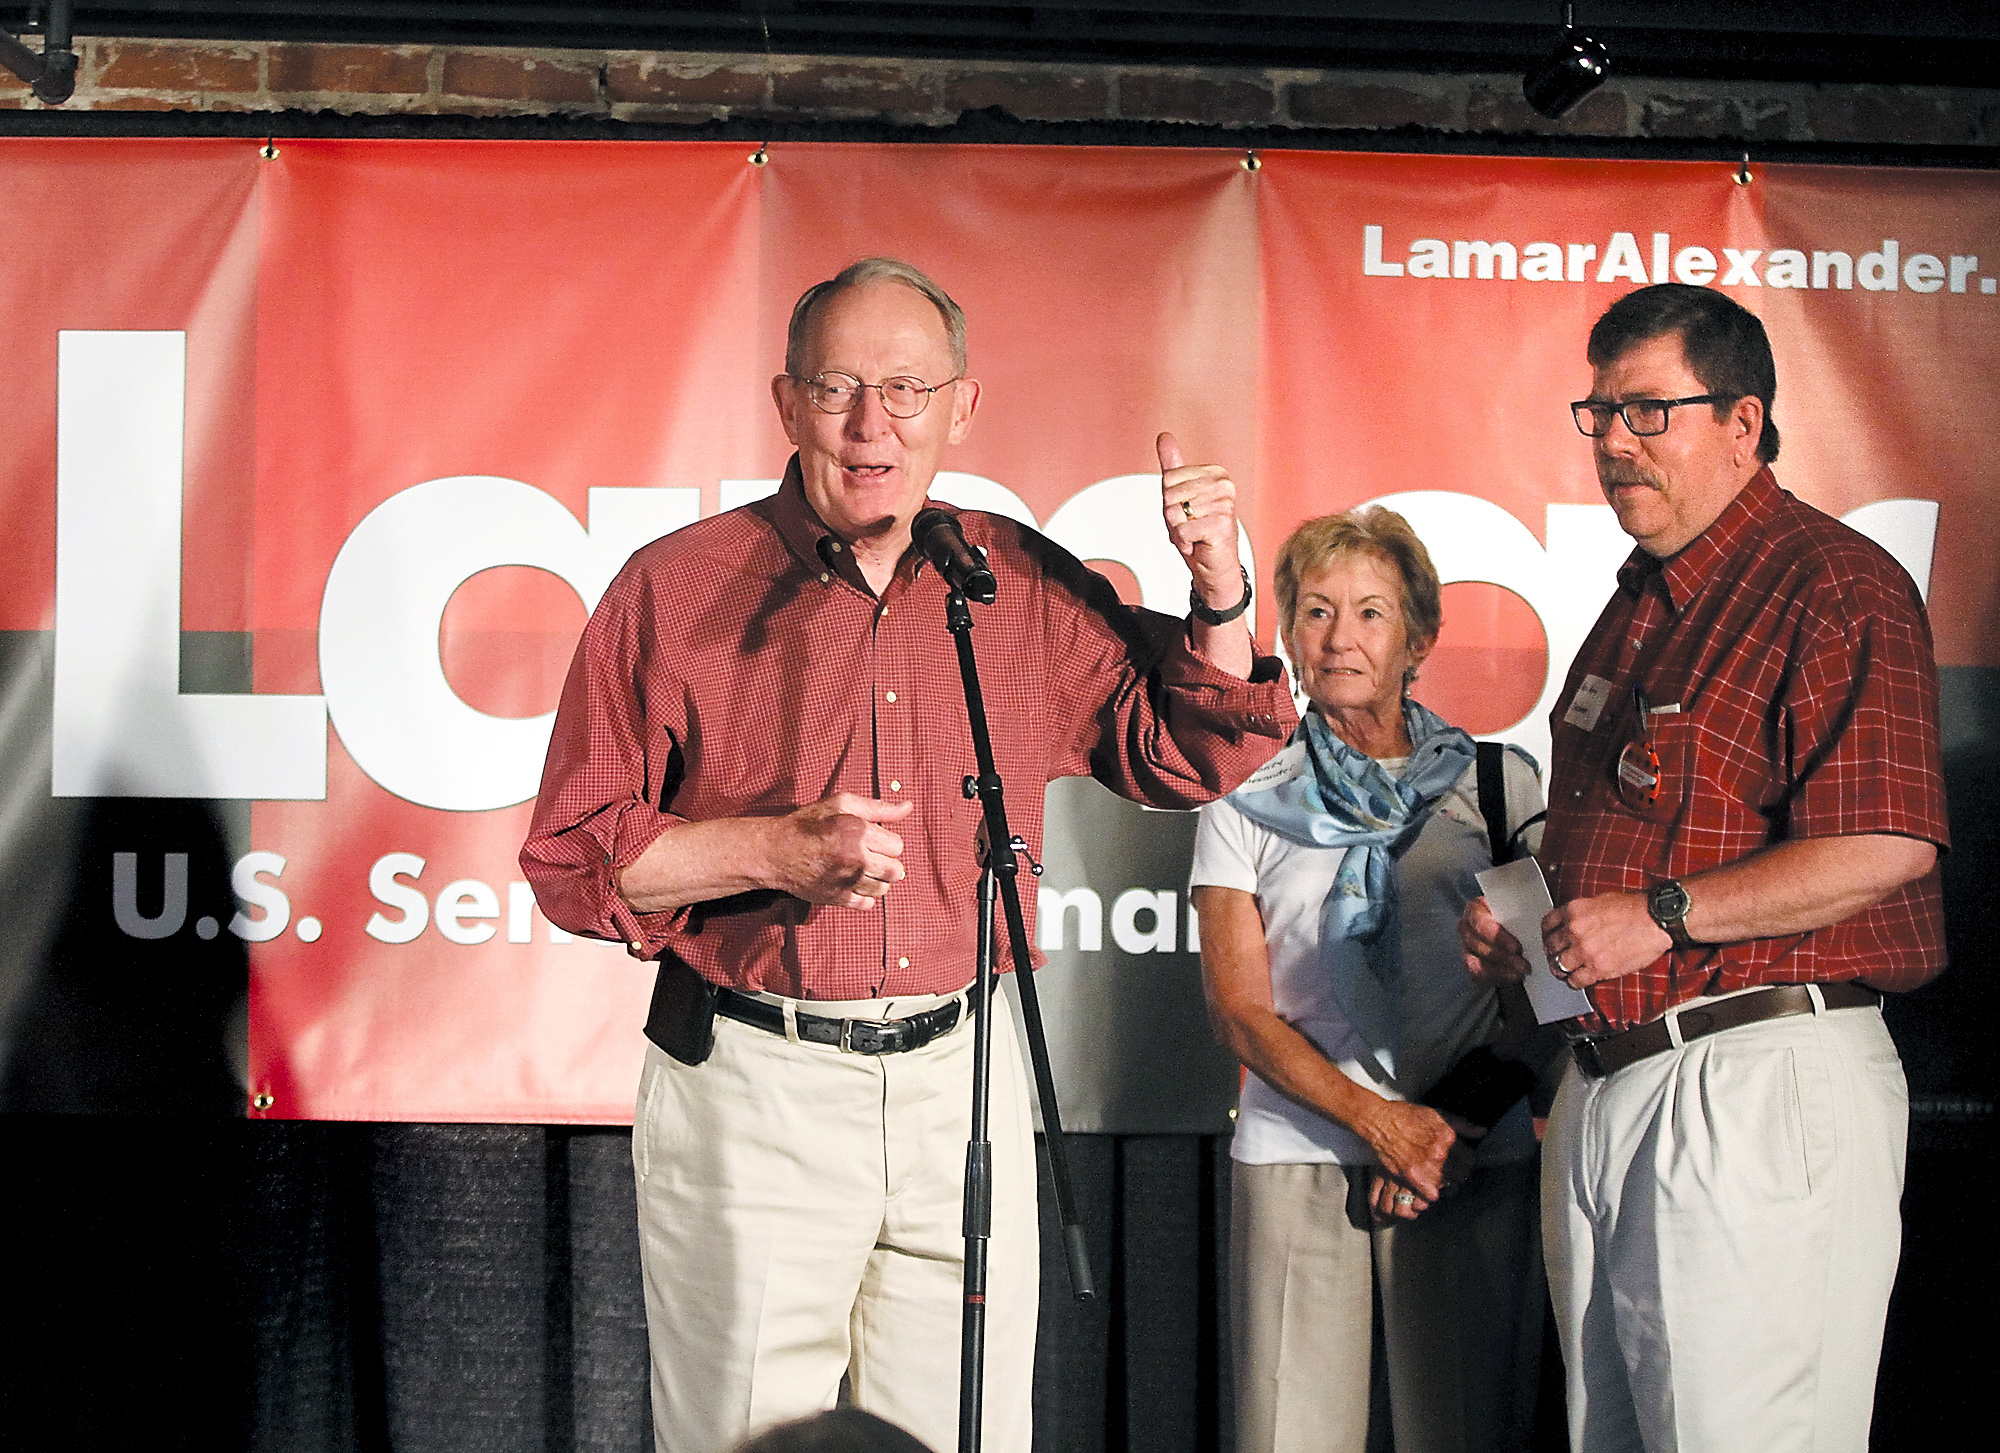 U.S. Senator Lamar Alexander announces the kickoff of his "Standing Up for Tennessee" bus tour at Sullivan's Restaurant in his hometown of Maryville, Tenn., as his wife Honey and State Rep. Art Swann look on on July 25, 2014.